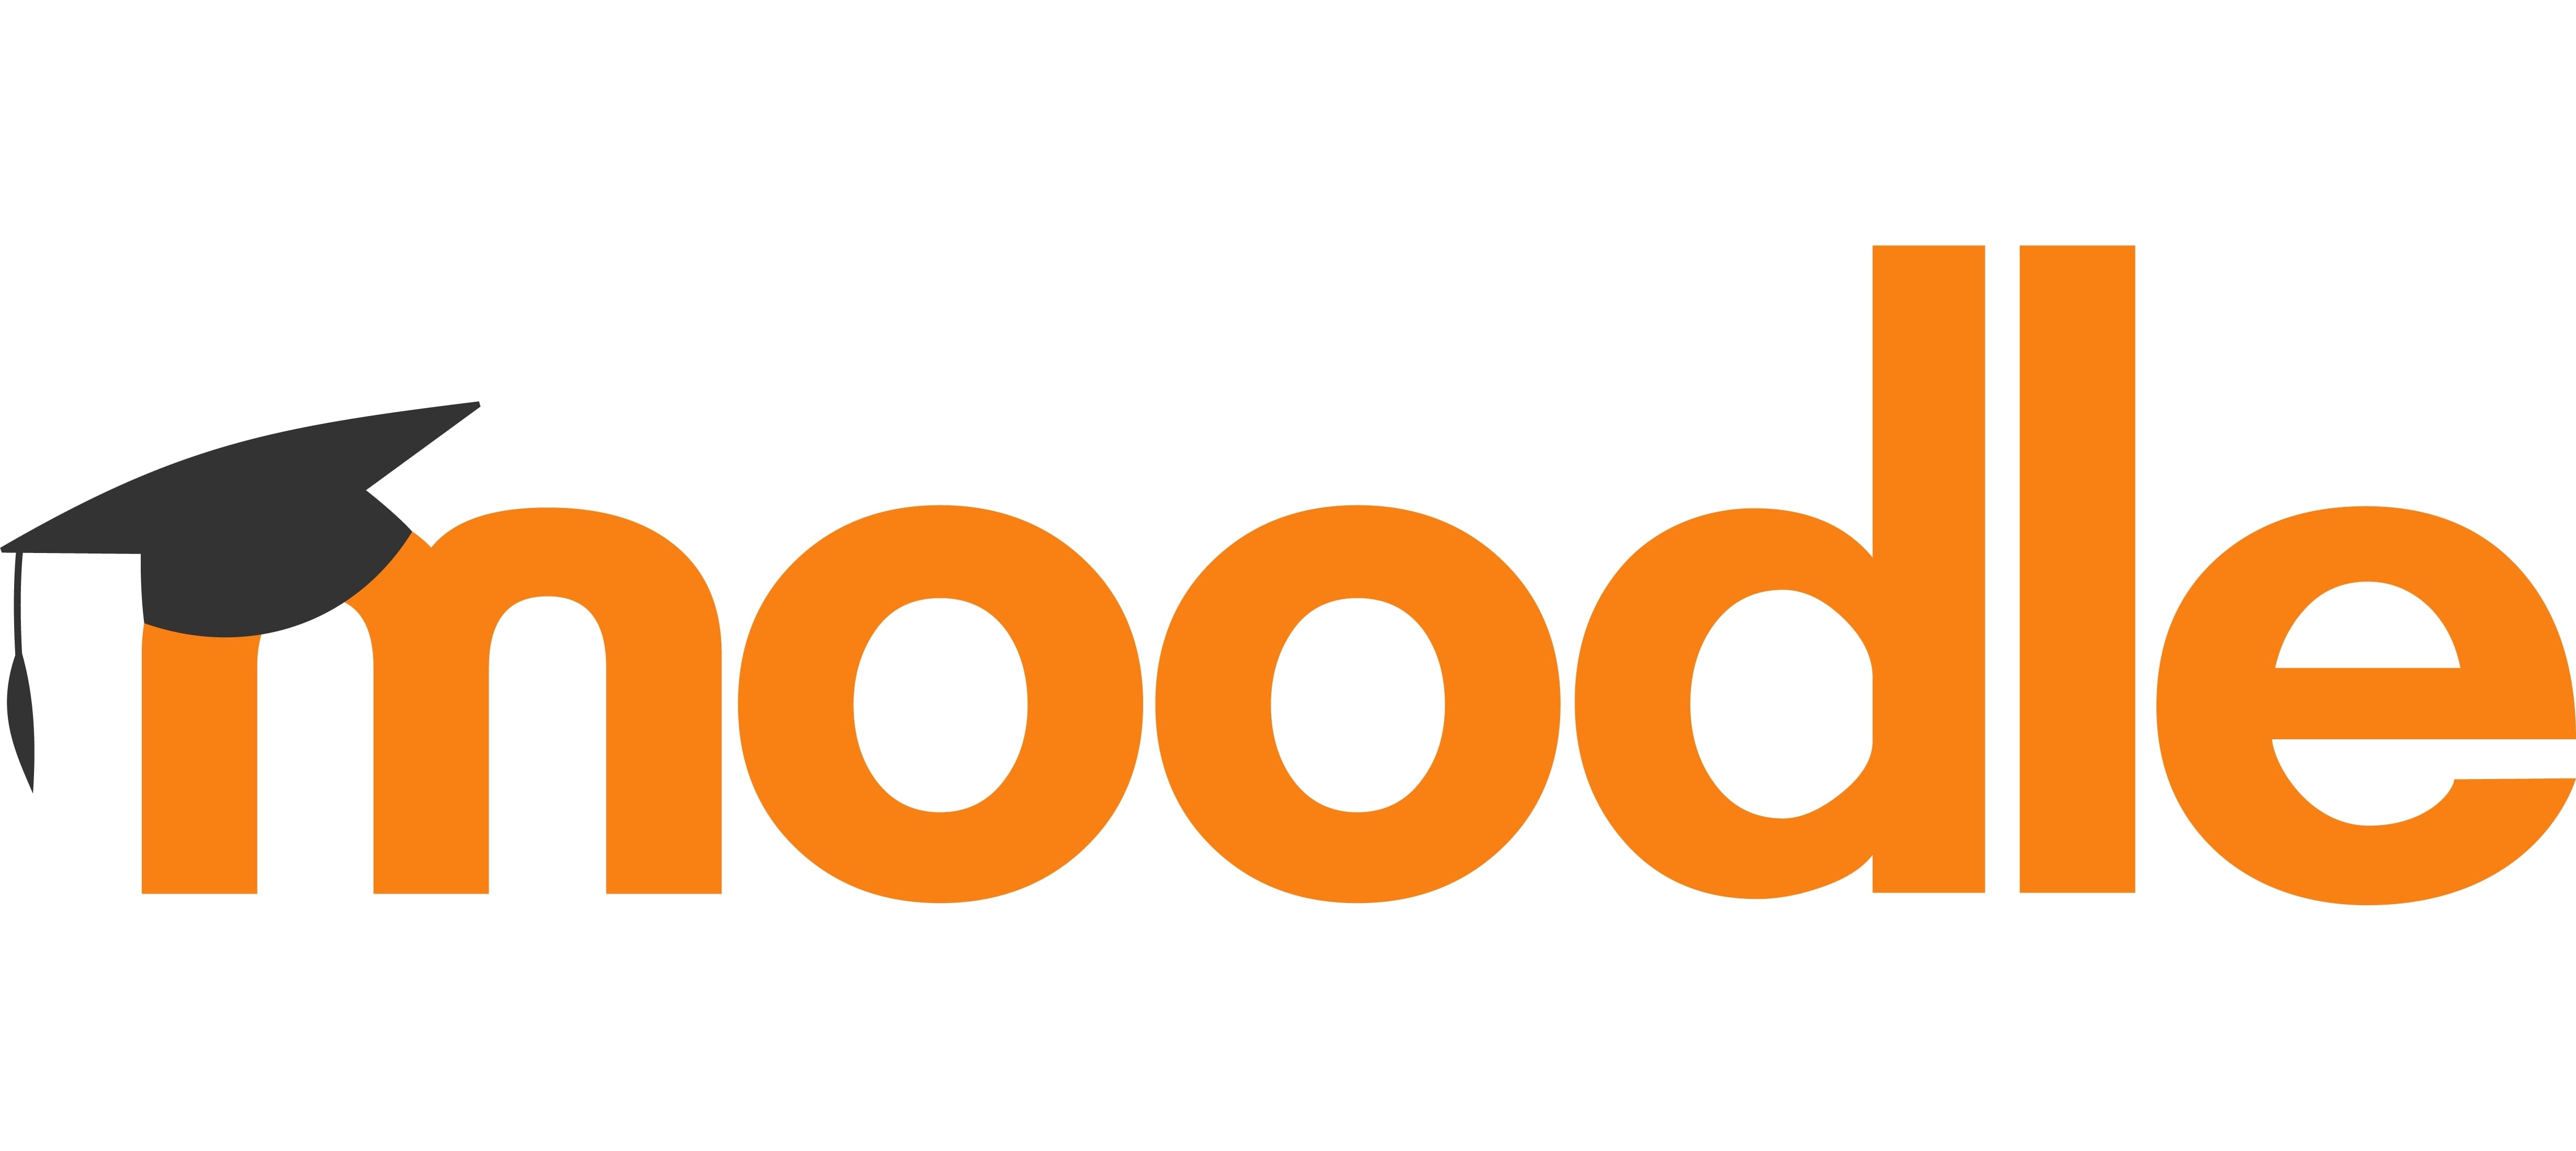 Moodle - A powerful assessment tool designed for managing complex assignments and assessments